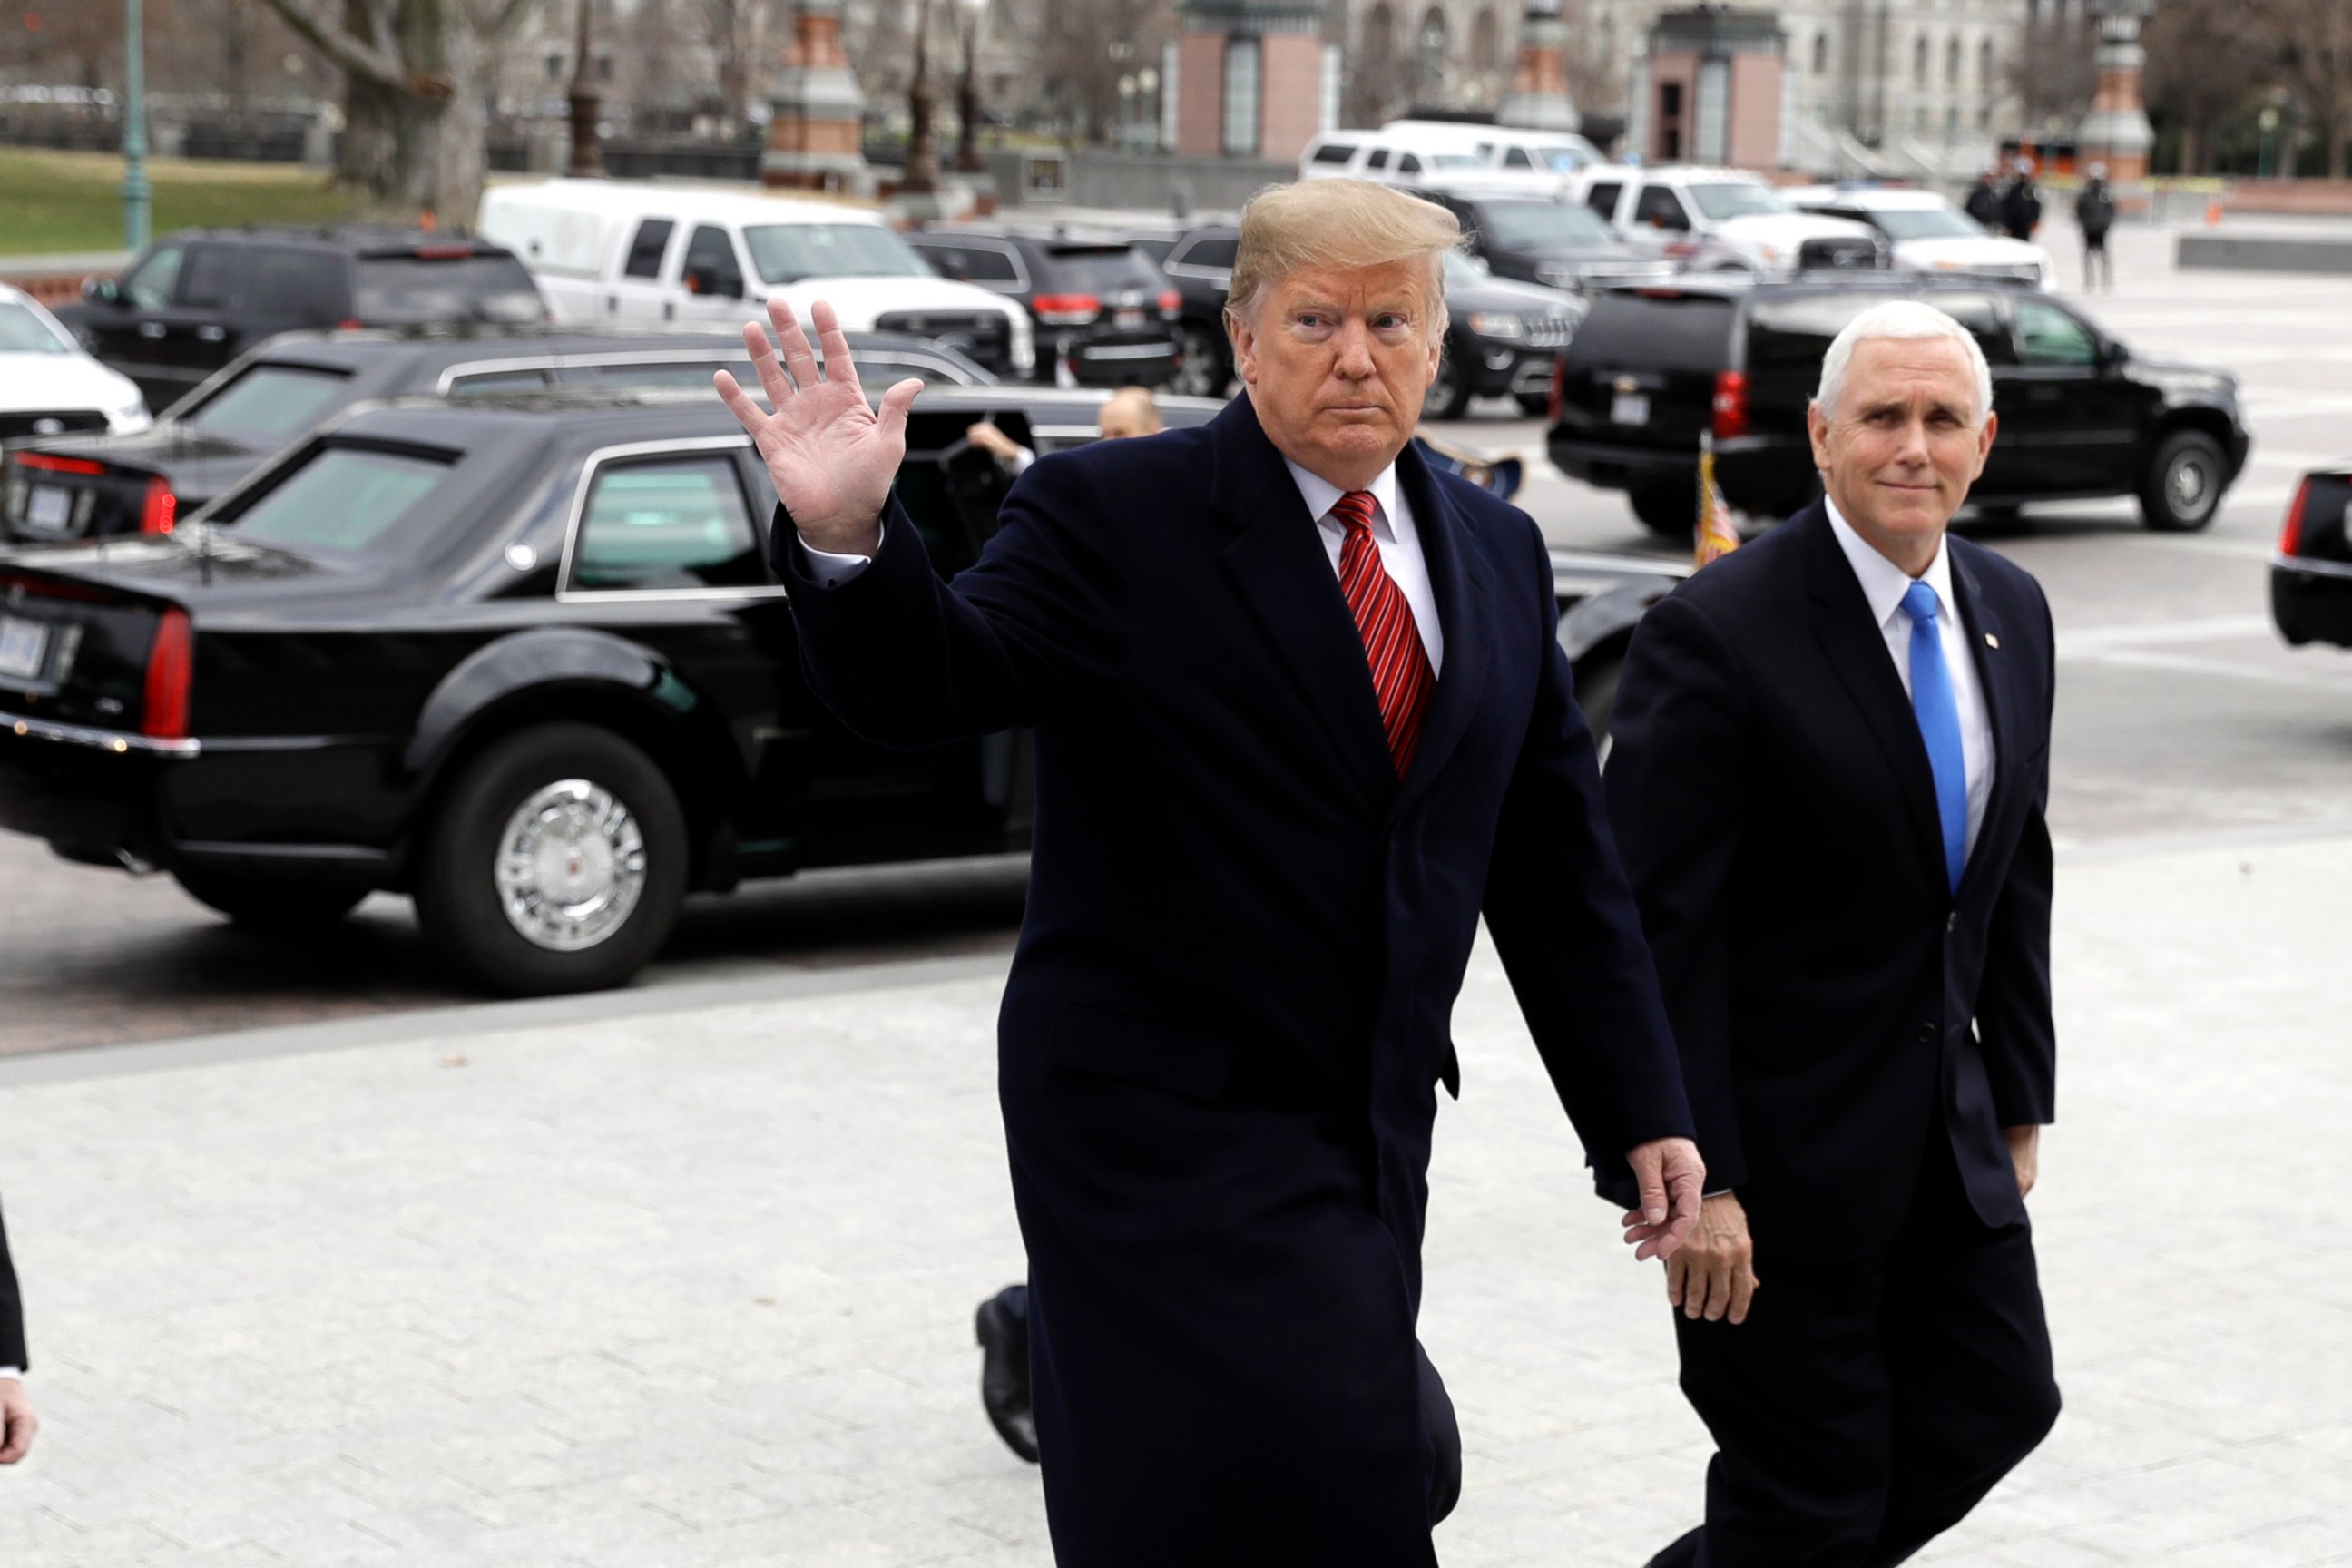 PHOTO: In this Jan. 9, 2019, photo, President Donald Trump arrives with Vice President Mike Pence to attend a Senate Republican policy lunch on Capitol Hill in Washington.